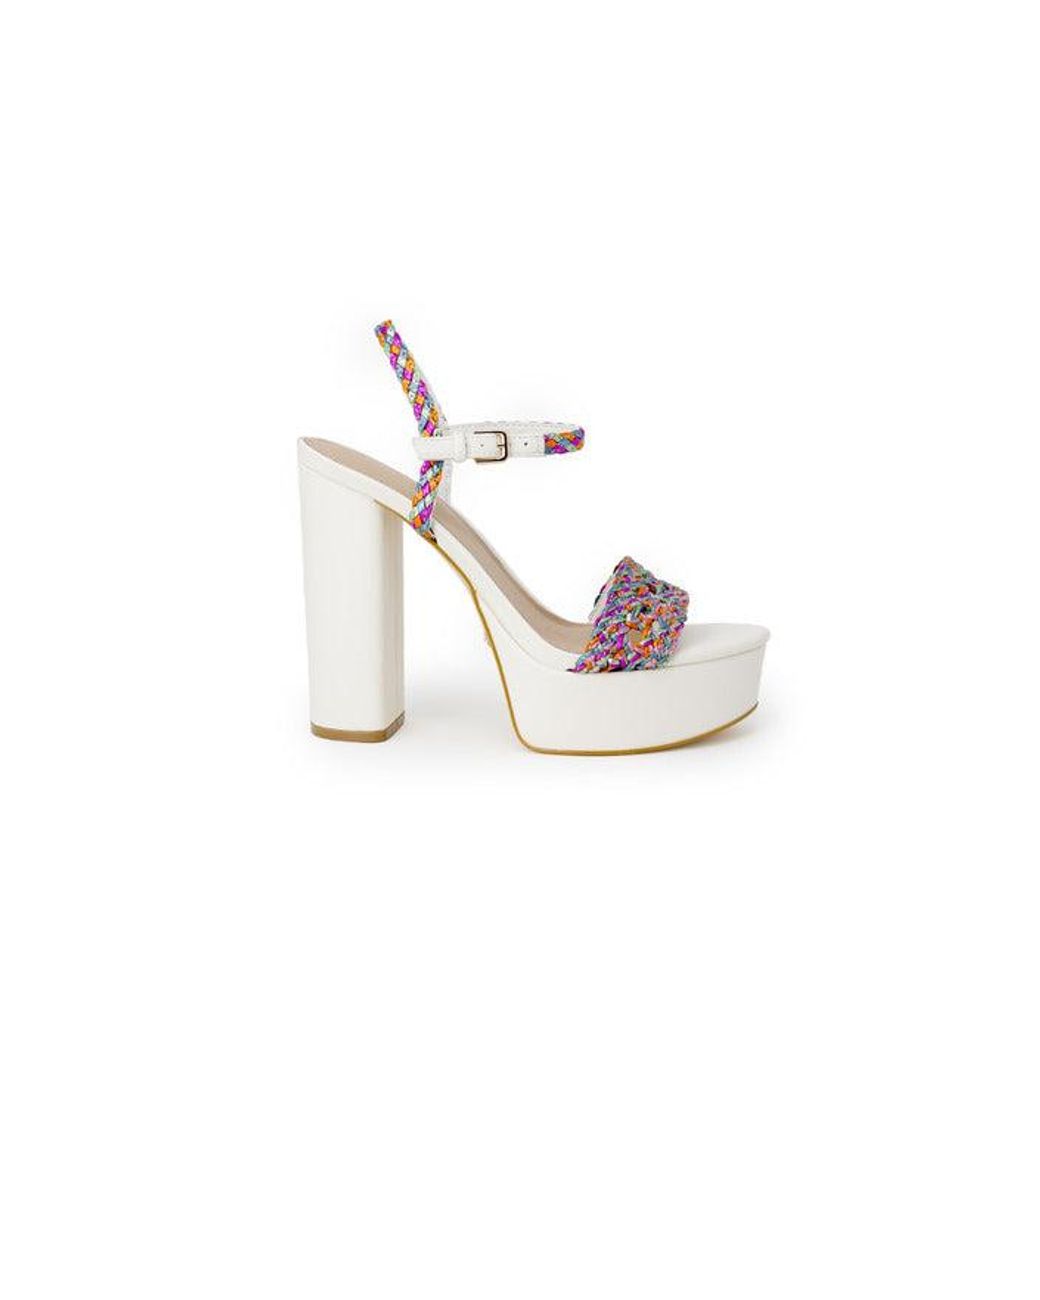 Sandals Guess - Sandals in white with weaves - FL6MADLEA03WHITE